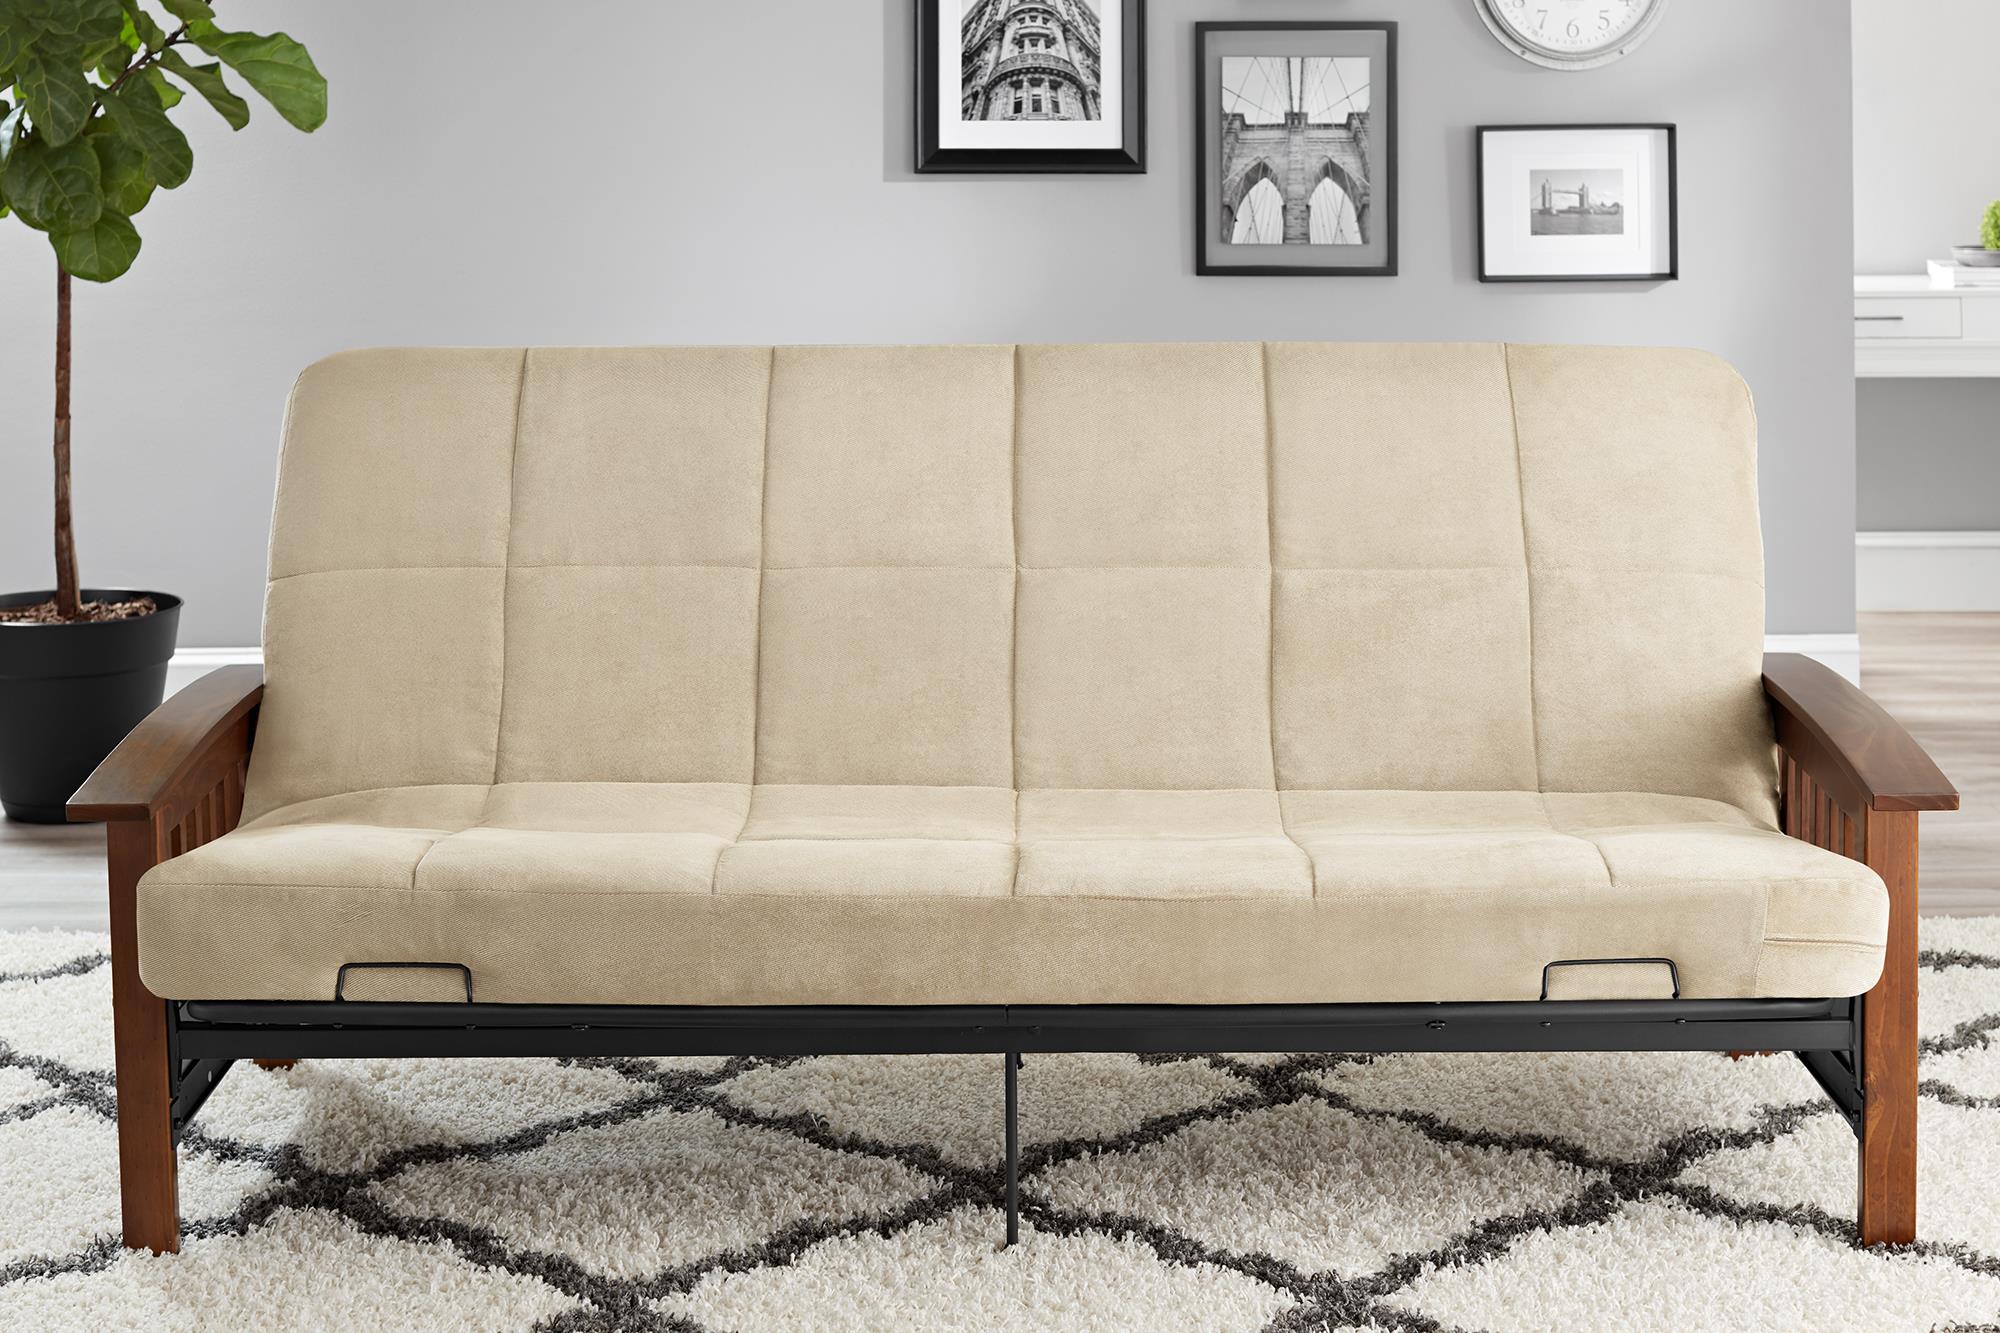 Better Homes & Gardens Neo Mission Wood Arm Futon with 6-inch Tan Mattress - image 4 of 12